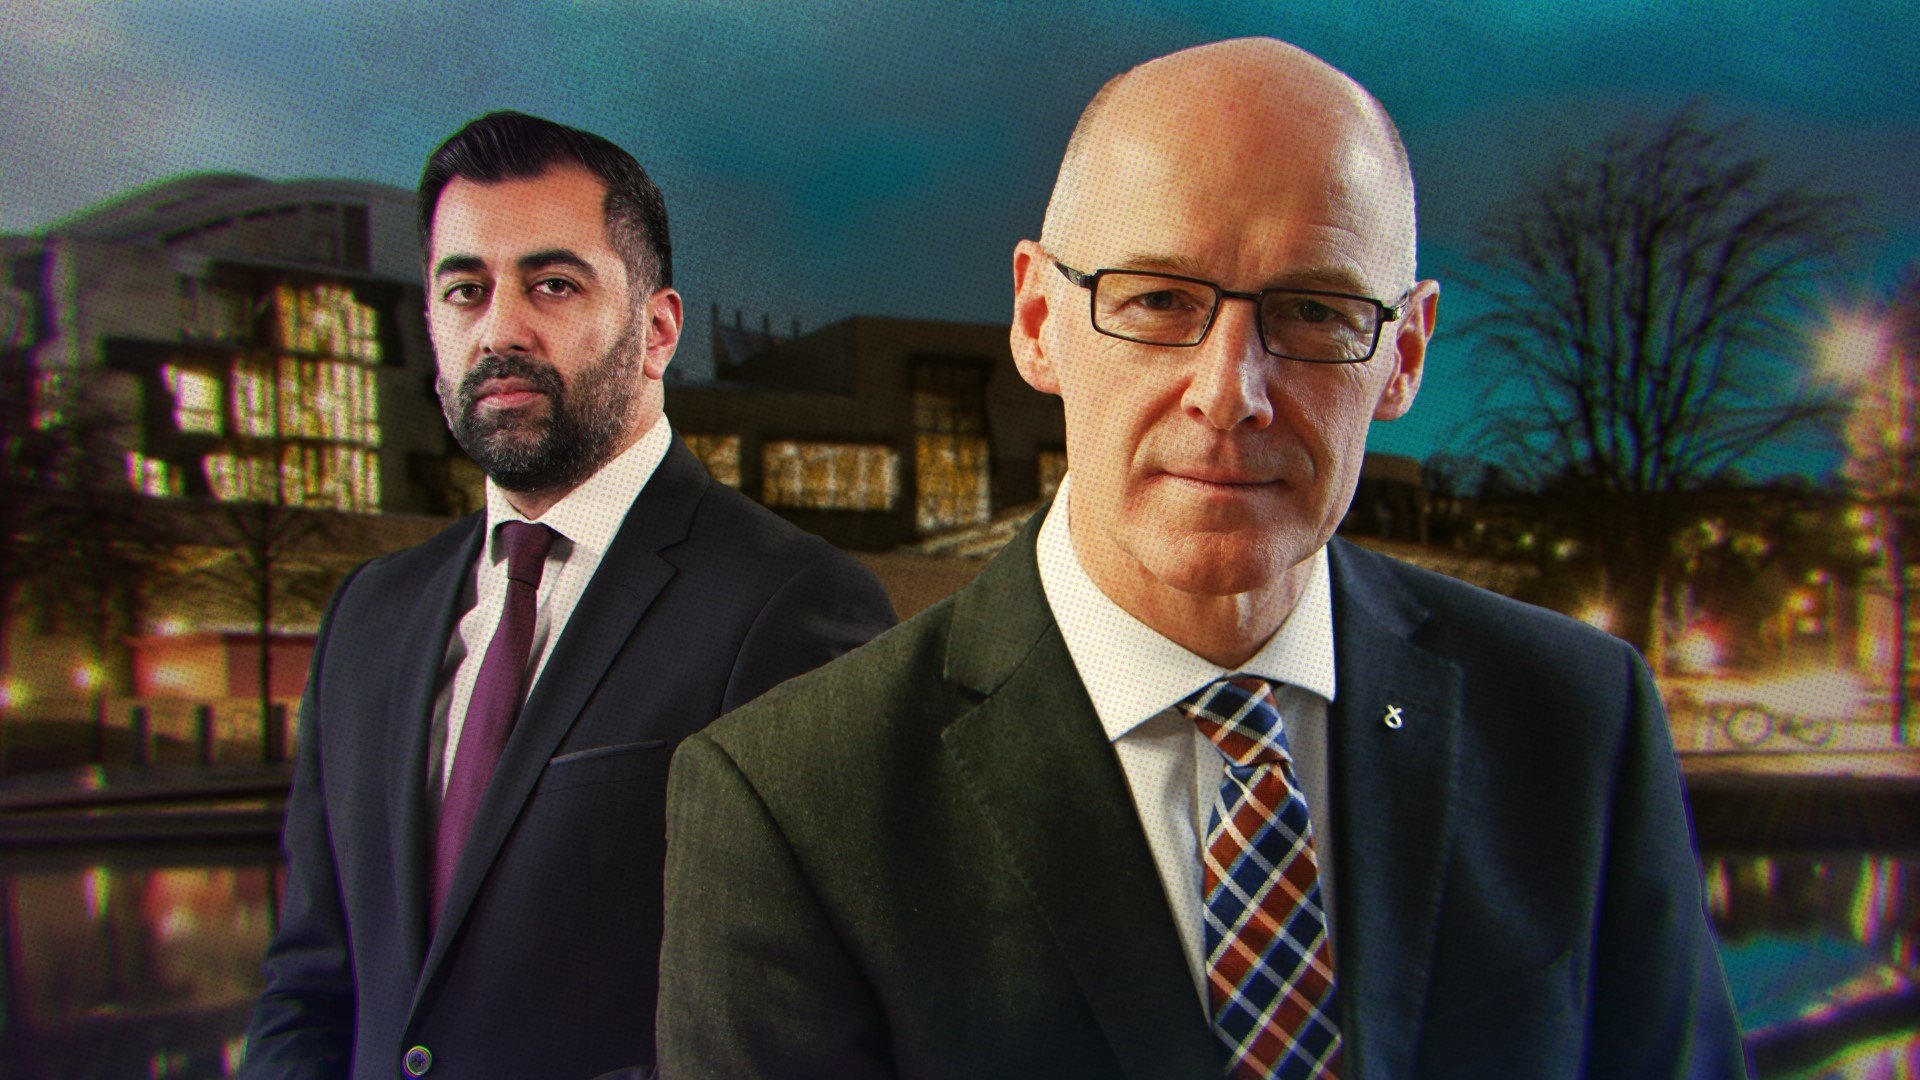 Humza Yousaf has quit as First Minister of Scotland in the face of being ousted with John Swinney set to replace him.